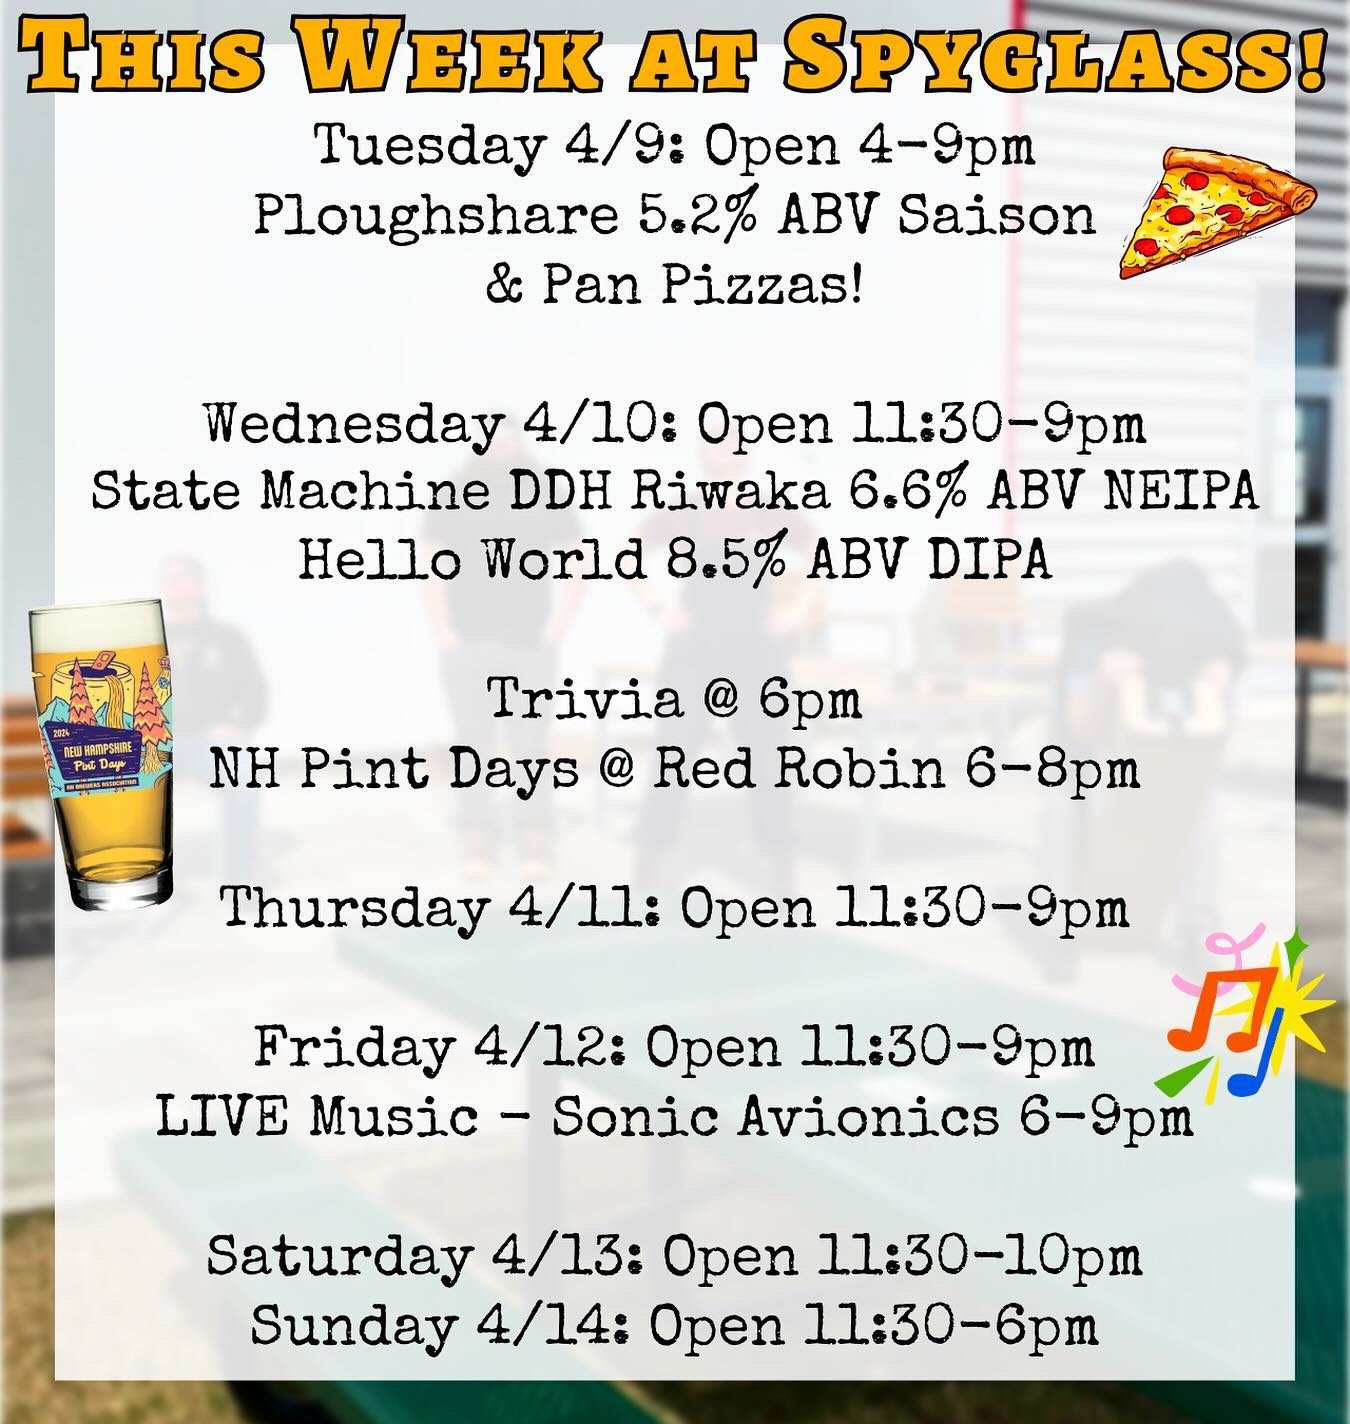 This Week at Spyglass!

Tuesday Open 4-9pm 
🍕Chef Special Pizza - Buffalo Chicken - fried chicken, bacon, ranch, buffalo sauce, finished with grated blue cheese and scallions.

🍻 This weeks Beer Releases 🍻
State Machine DDH Riwaka 6.6% ABV NEIPA
P